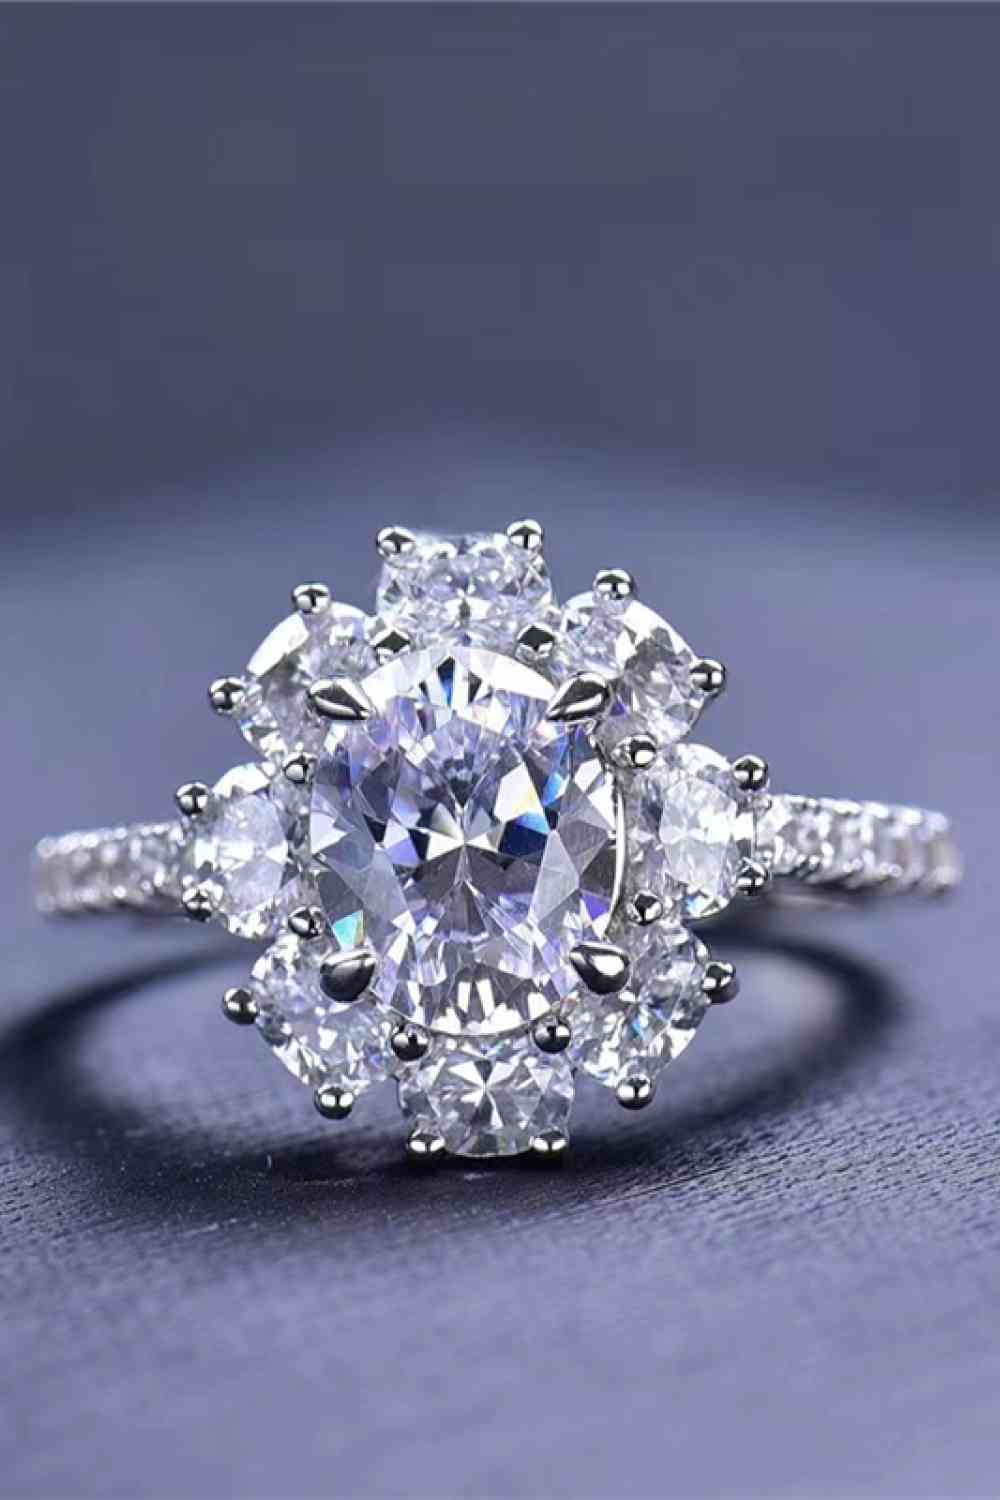 a diamond ring with a center stone surrounded by smaller diamonds